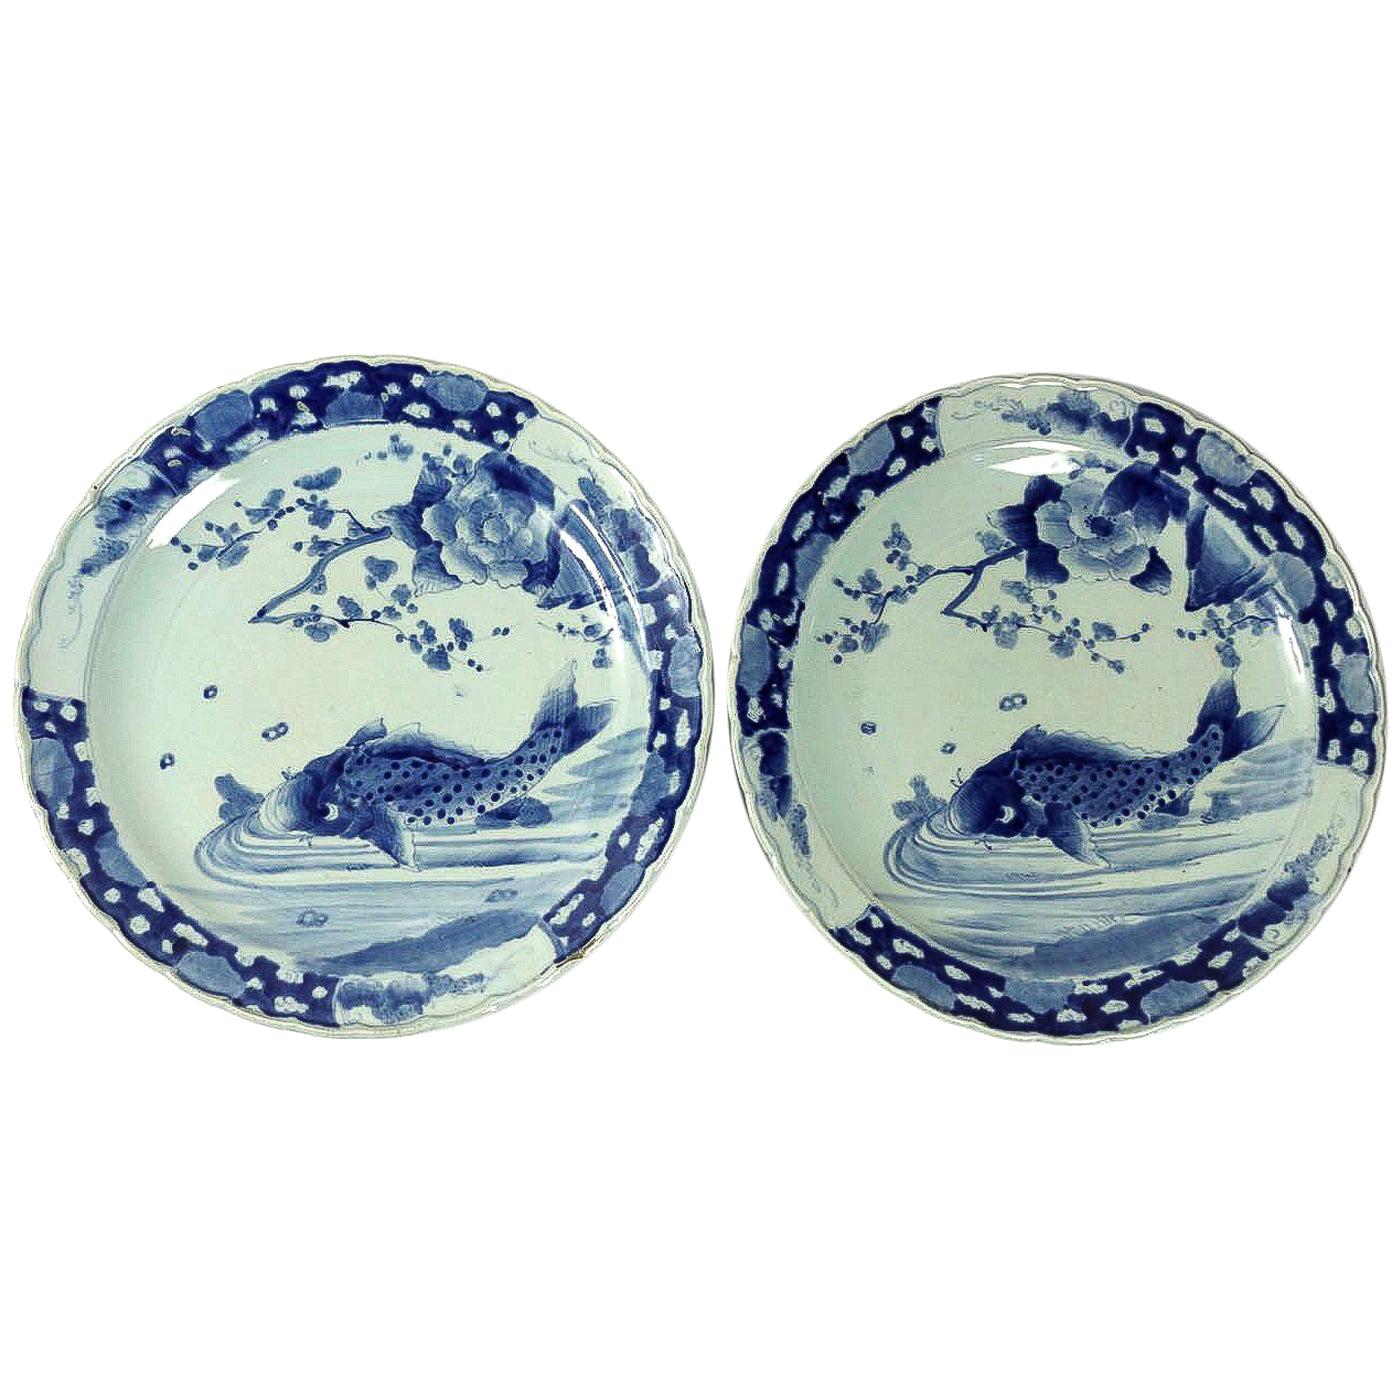 19th Century Japan, a Large Pair of Porcelain Dishes with Blue Koï Carps For Sale